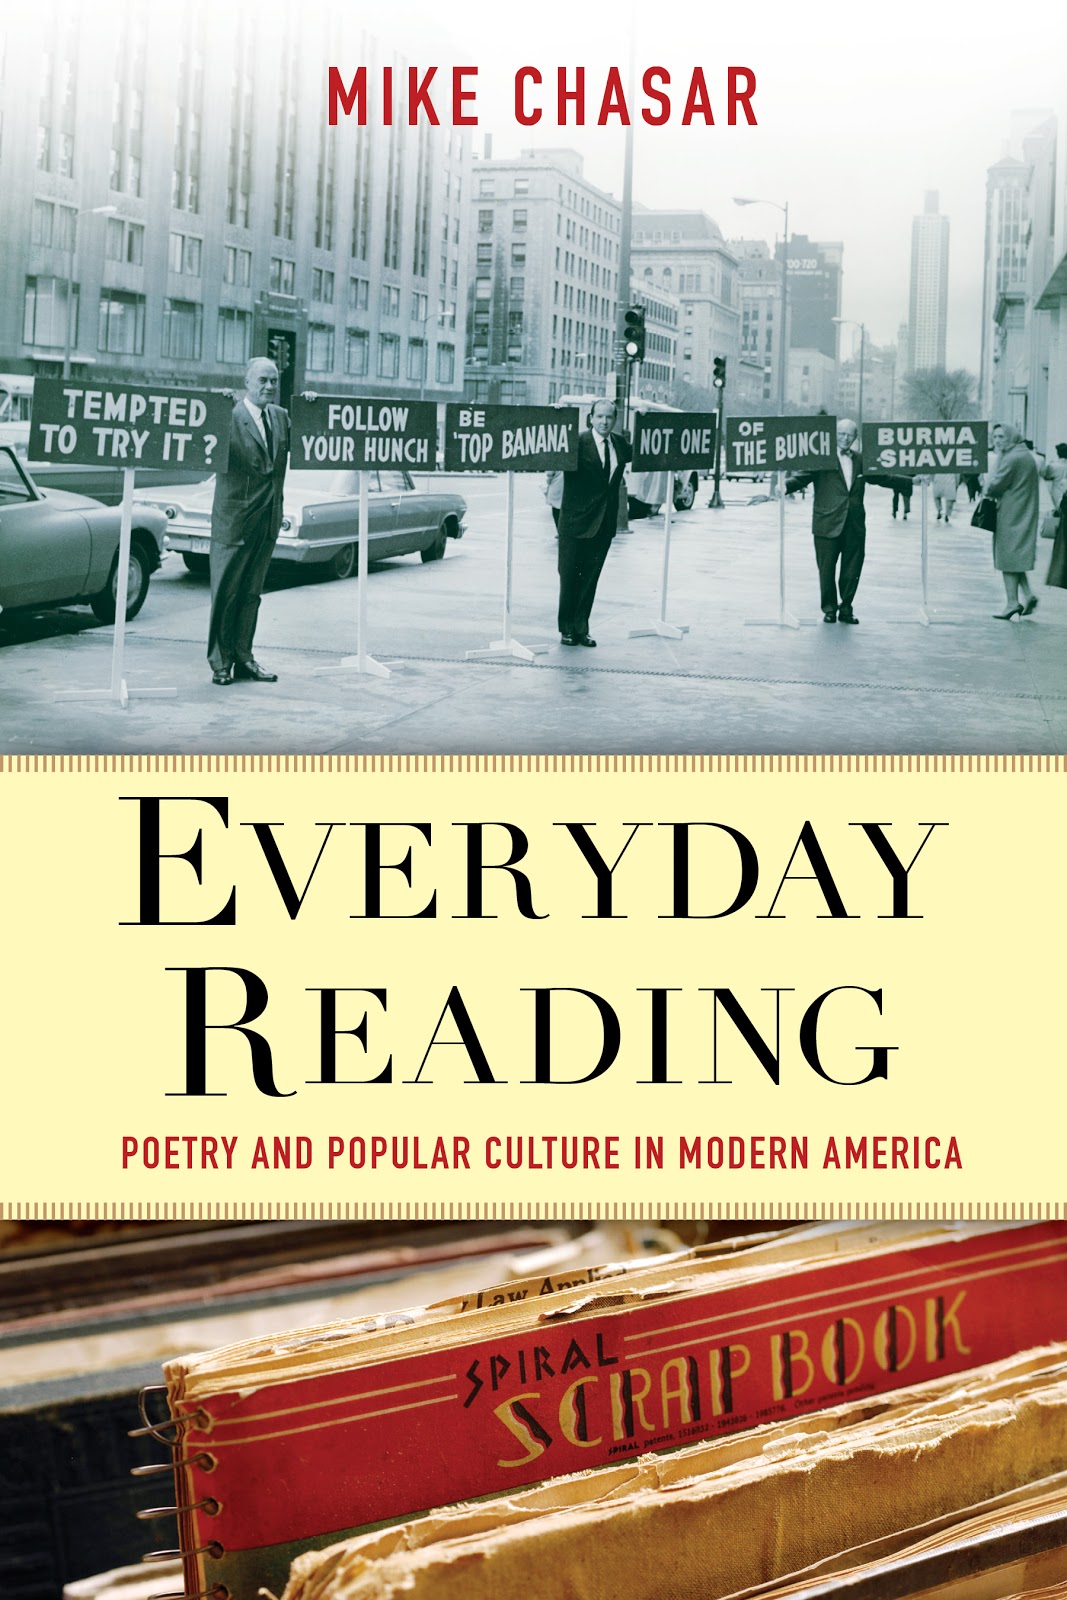 Reading every Day. The History of Modern American Dance reading answers.